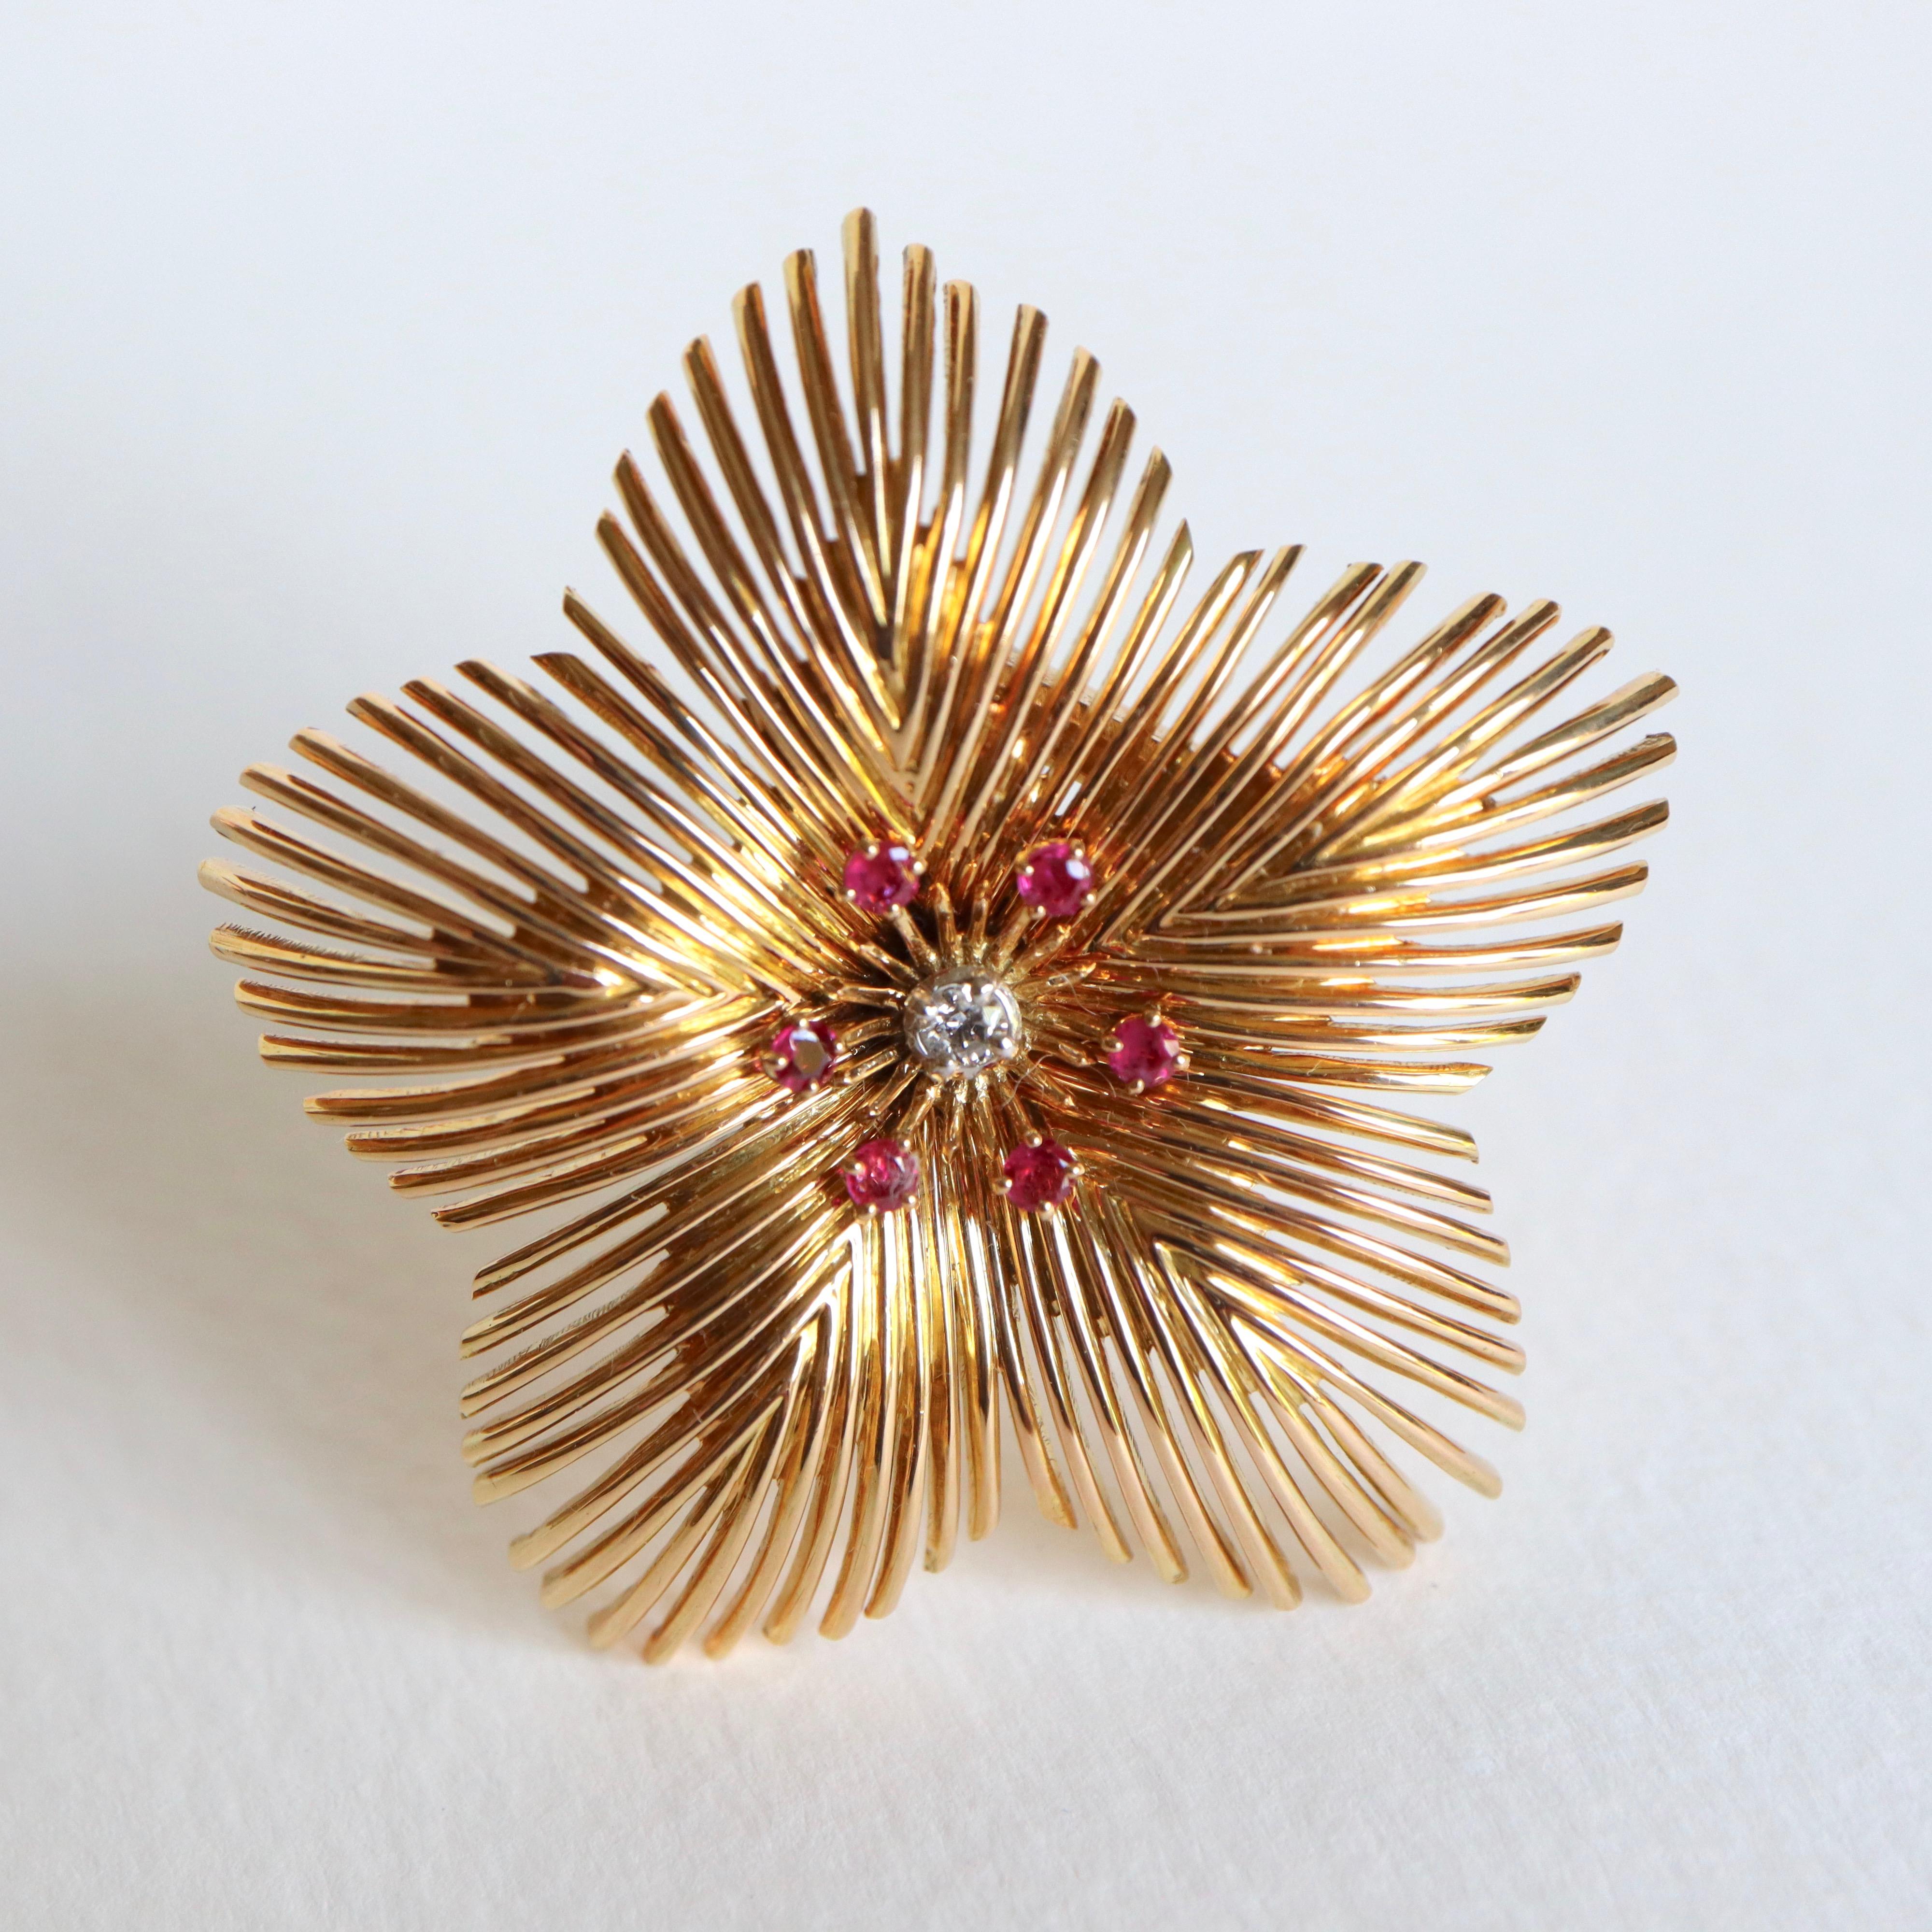 Lapel clip brooch in 18 Kt yellow gold representing a 5-petalled flower adorned with 6 rubies and a central diamond.
Period 1950 
Eagle Head Hallmark. French work
Weight 18g 
Diameter: about 50mm
